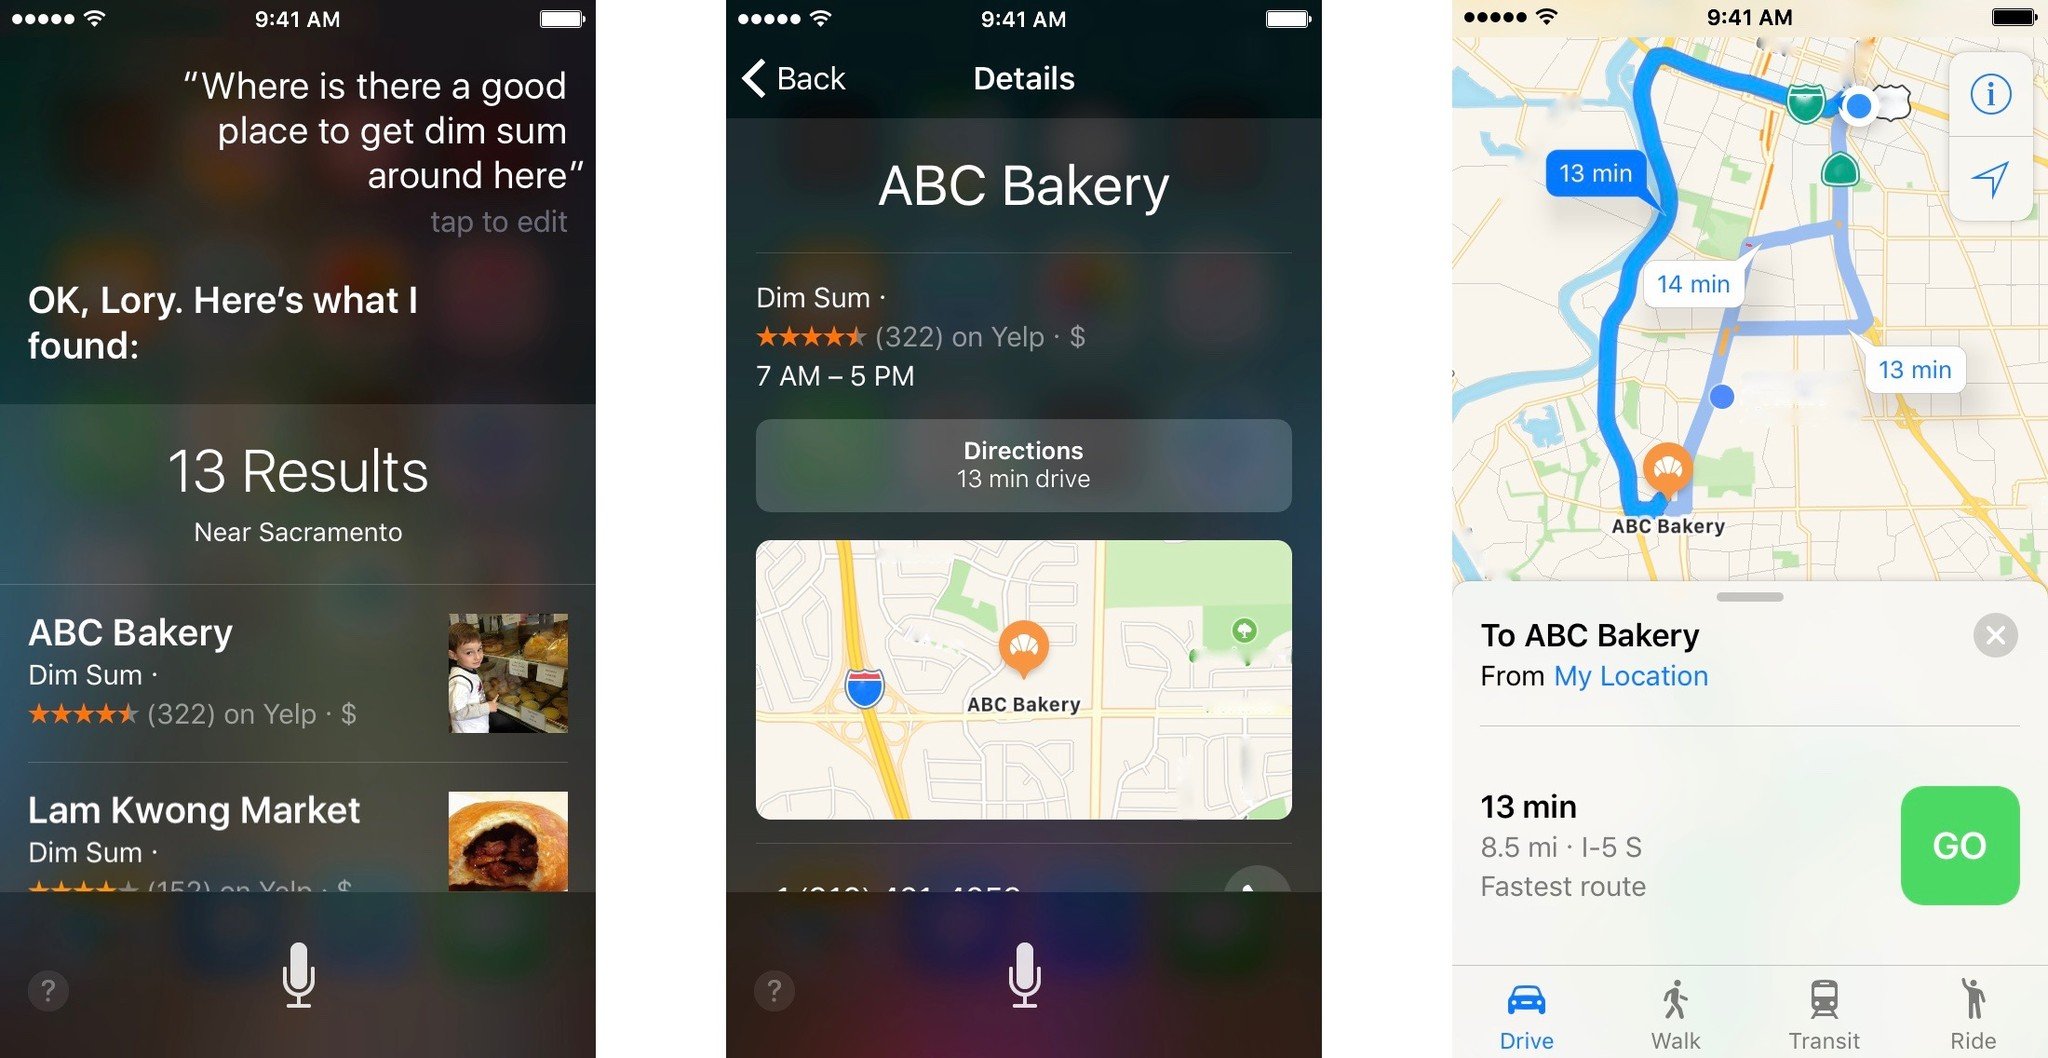 Ask Siri to search for locations